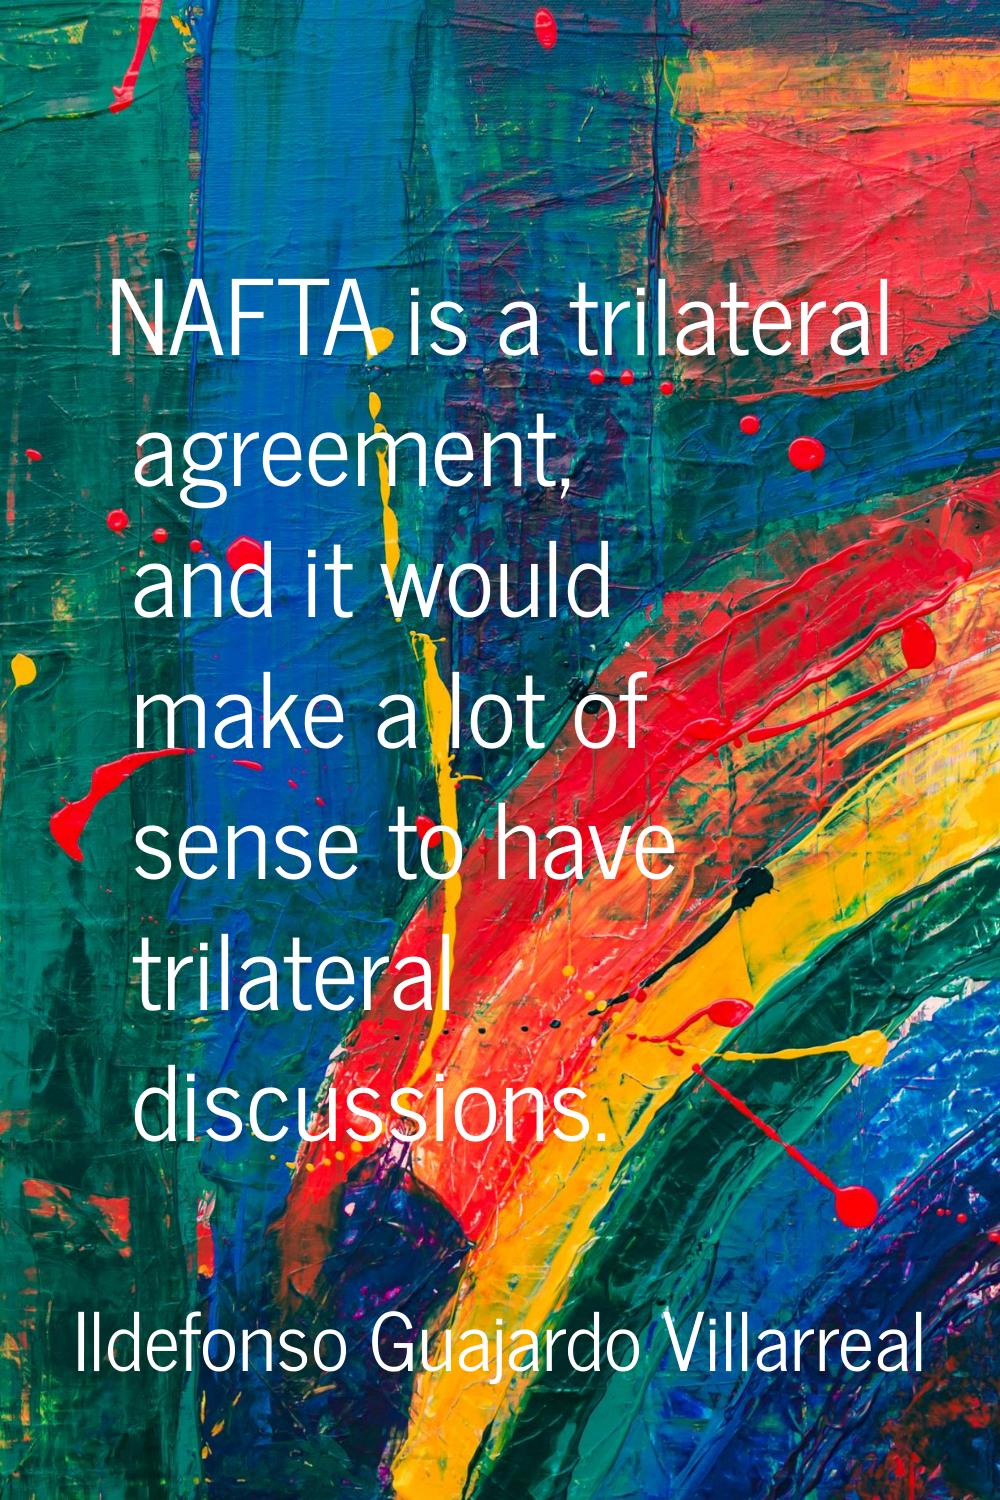 NAFTA is a trilateral agreement, and it would make a lot of sense to have trilateral discussions.